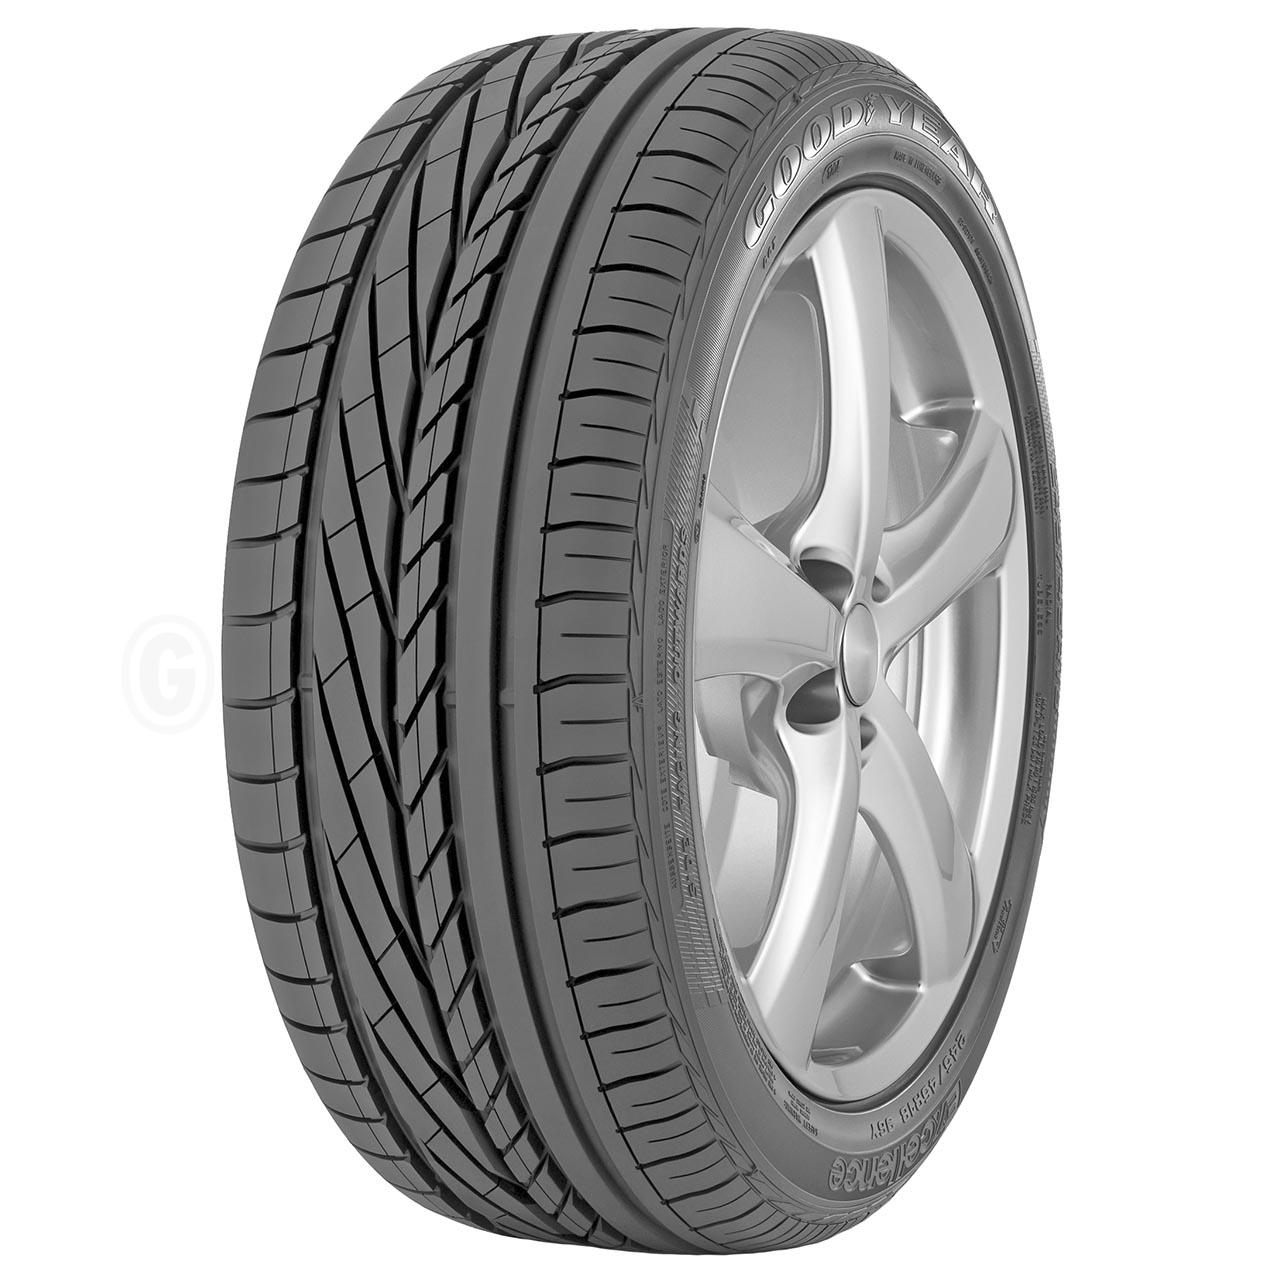 Goodyear Excellence 275/35R19 96Y ROF FP *